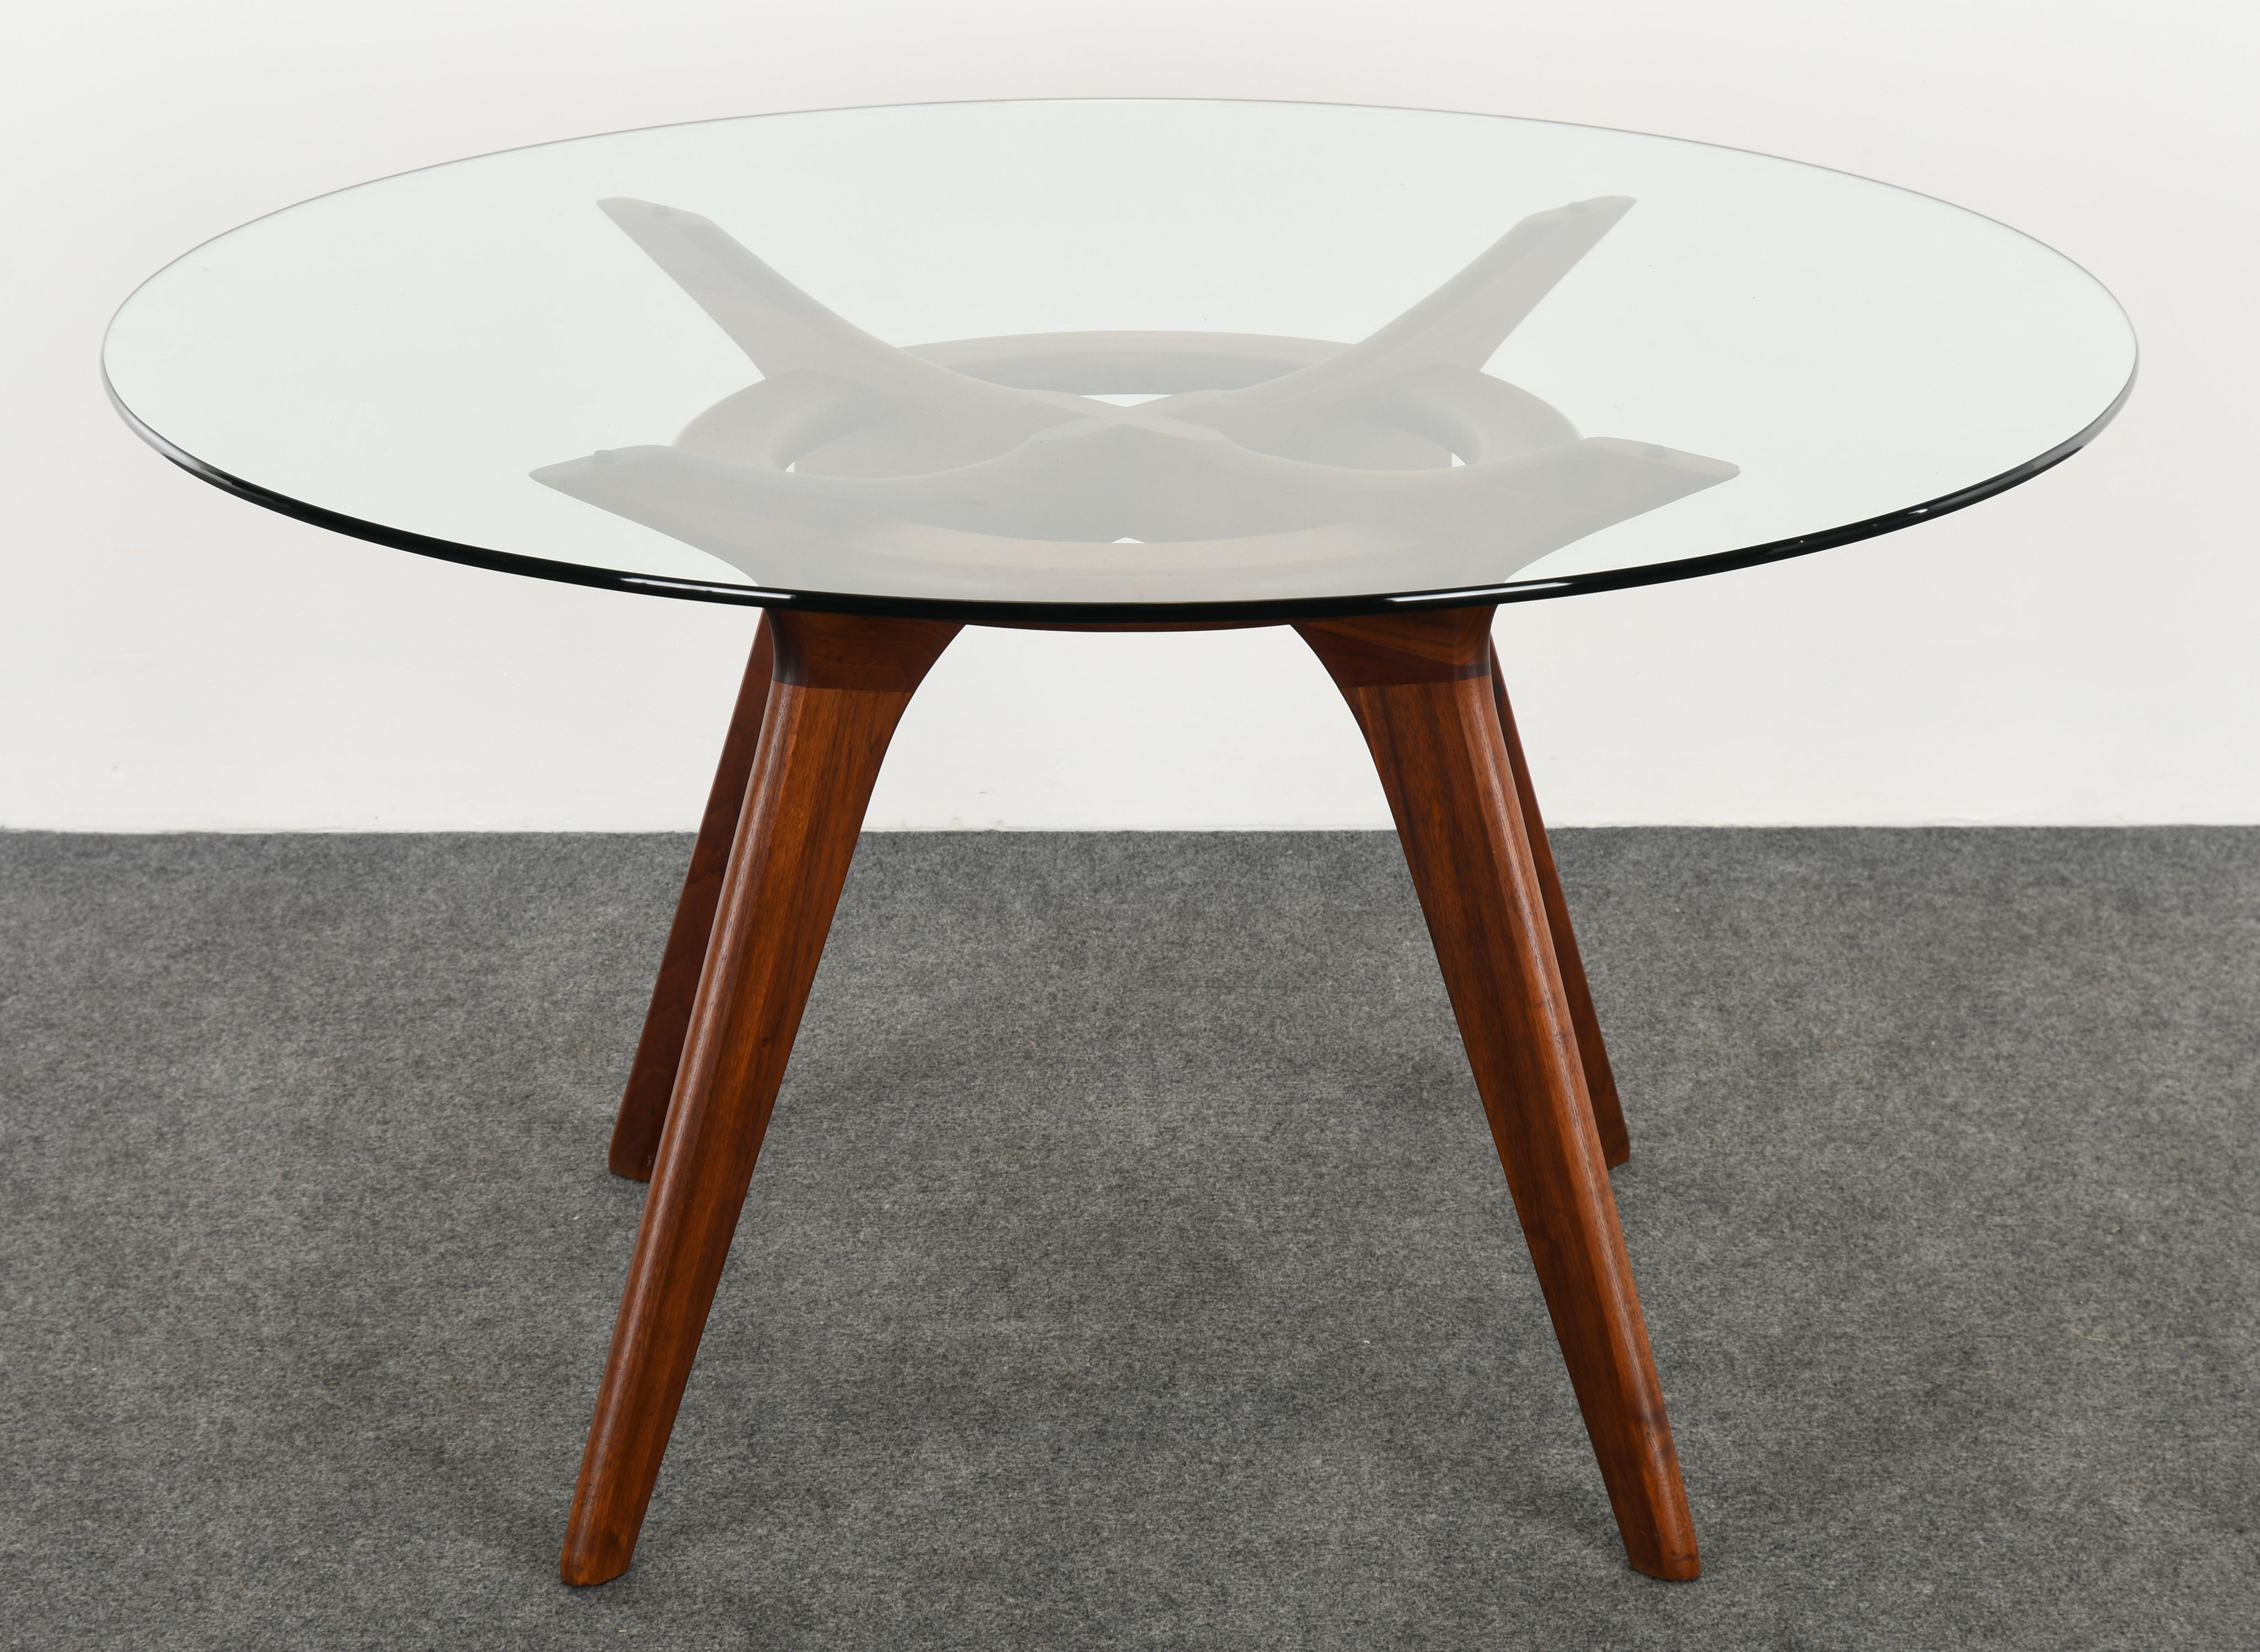 A beautiful Mid-Century Modern solid walnut dining table. This table is stunning at all angles. The table would look good in any modern or contemporary interior. The glass top was a custom size and is larger than the original. Some scratches to the